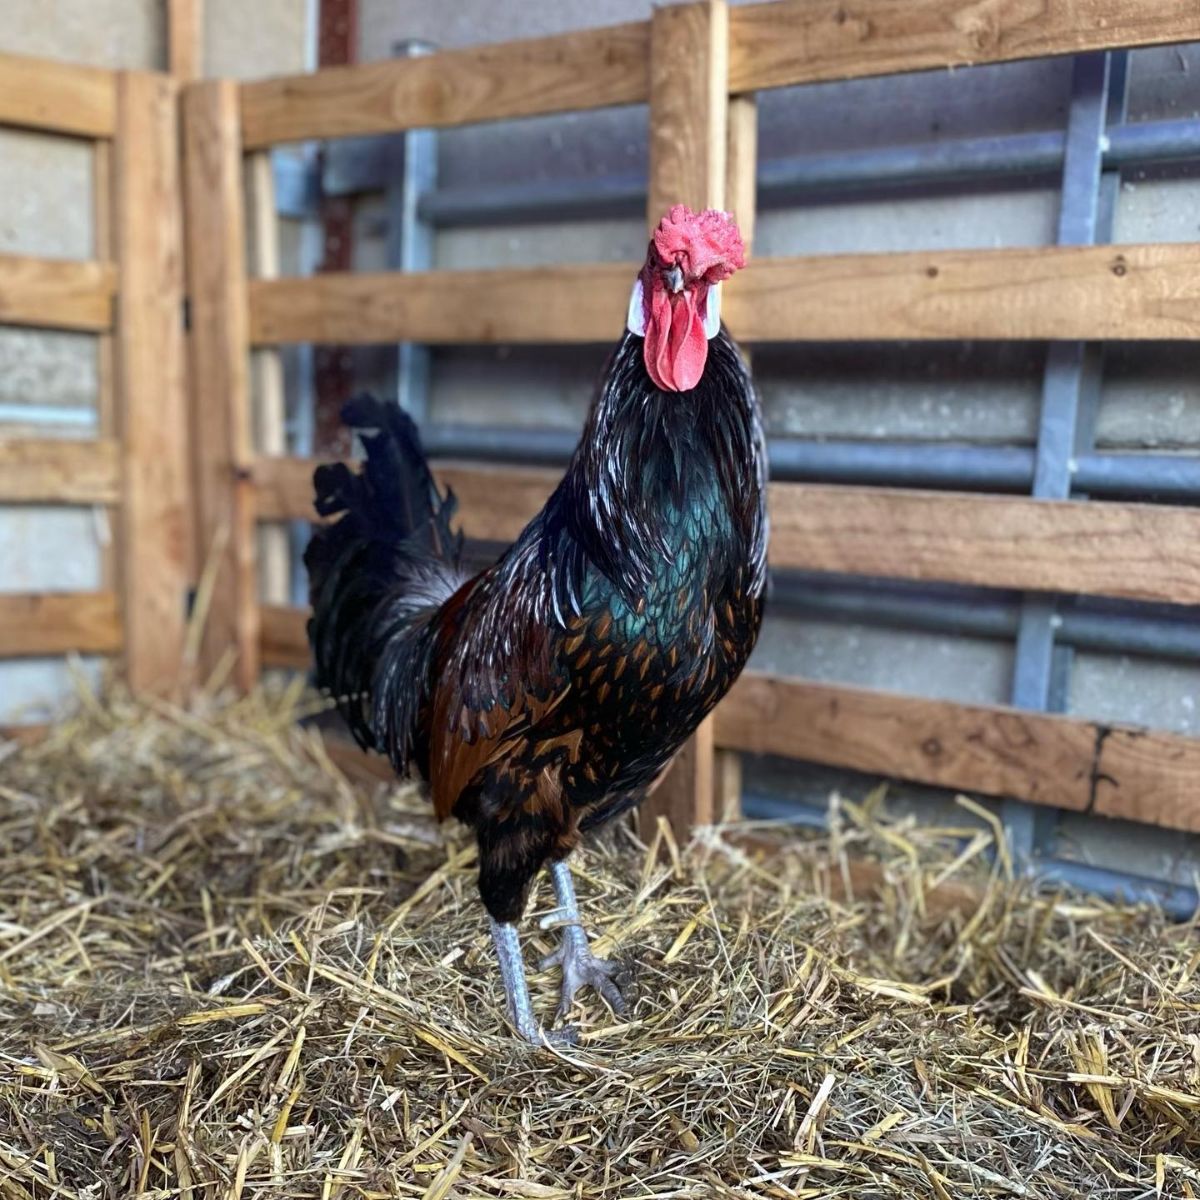 An adorable gold Old English Pheasant Fowl rooster stands in a chicken coop.